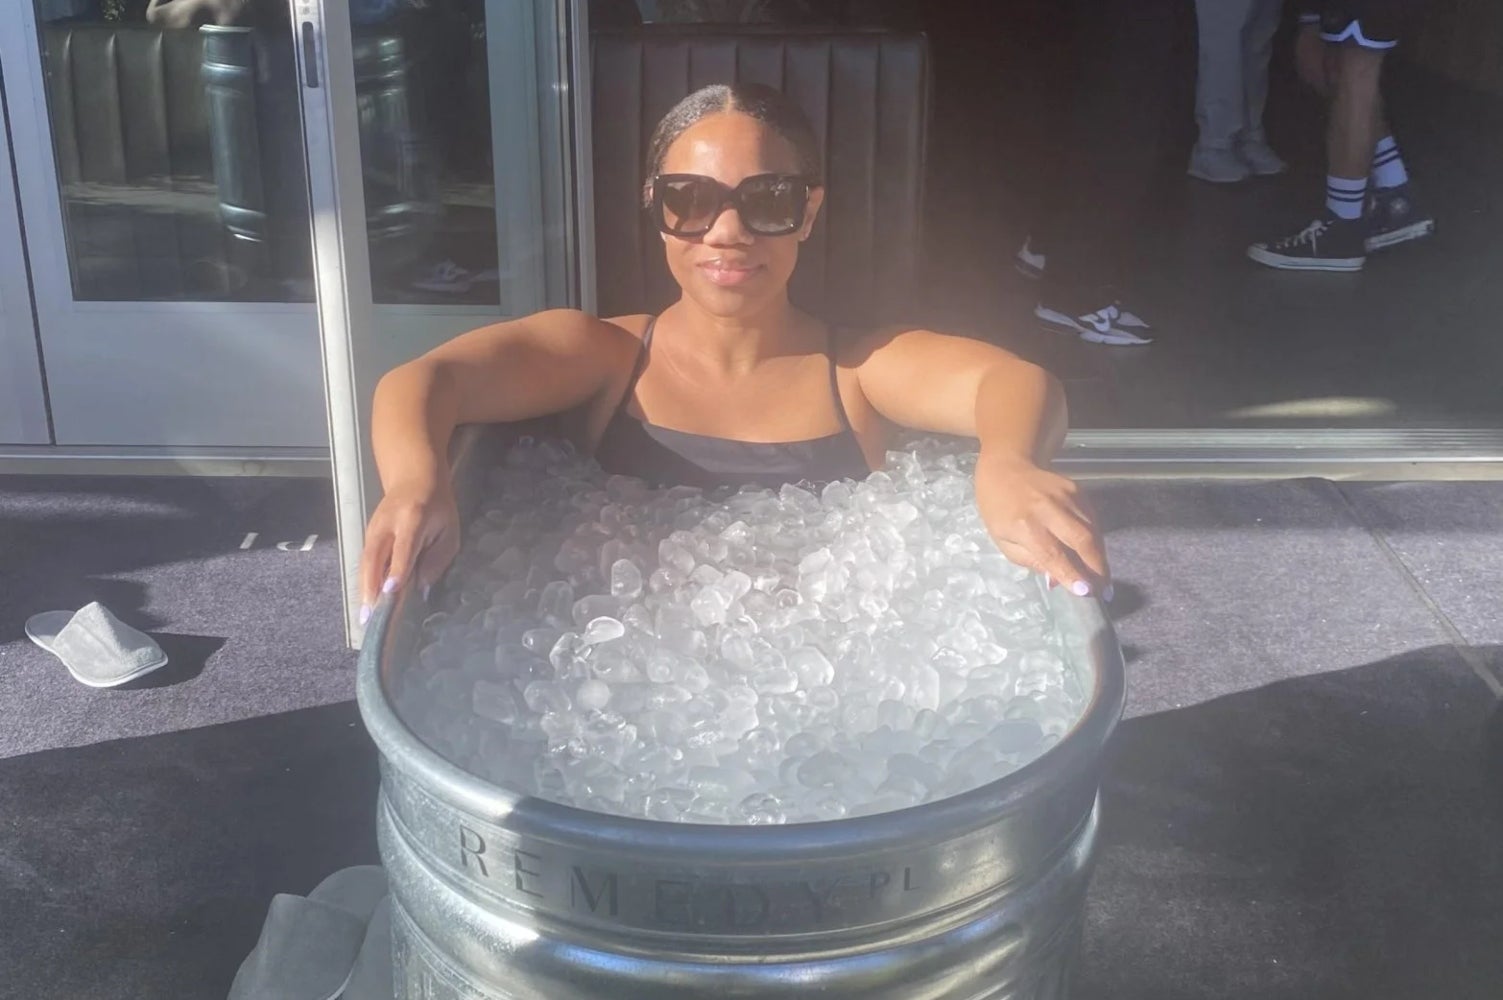 I Tried The Ice Bath Wellness Trend For My Eczema And Here's How It Went